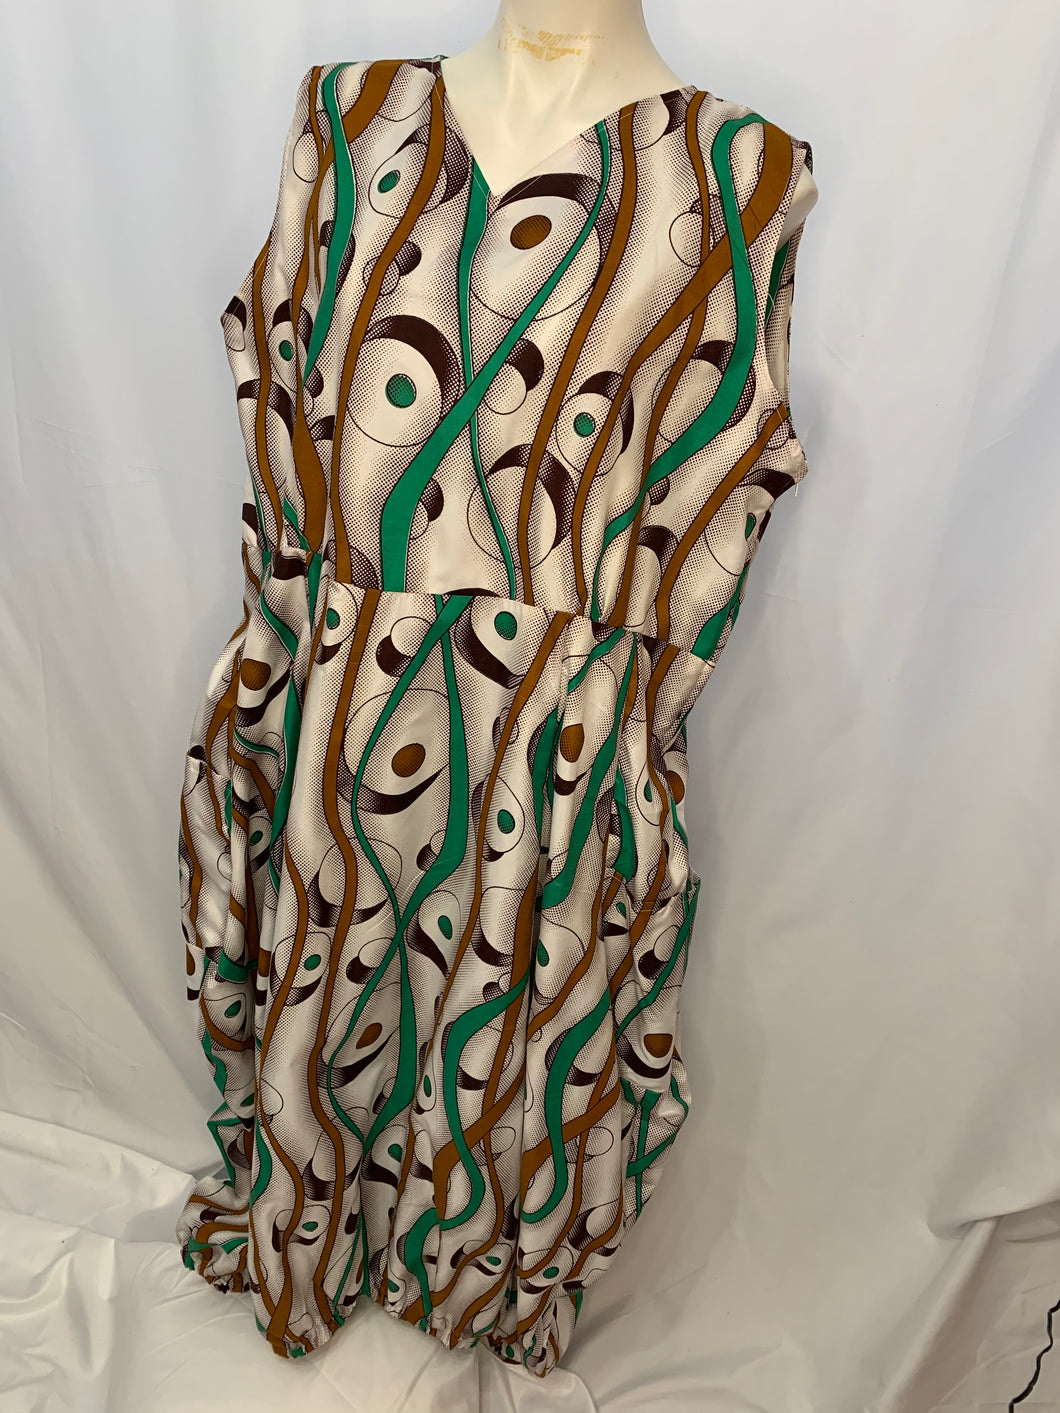 Handmade Big Pockets White Turquoise and Brown Maxi Dress One Size